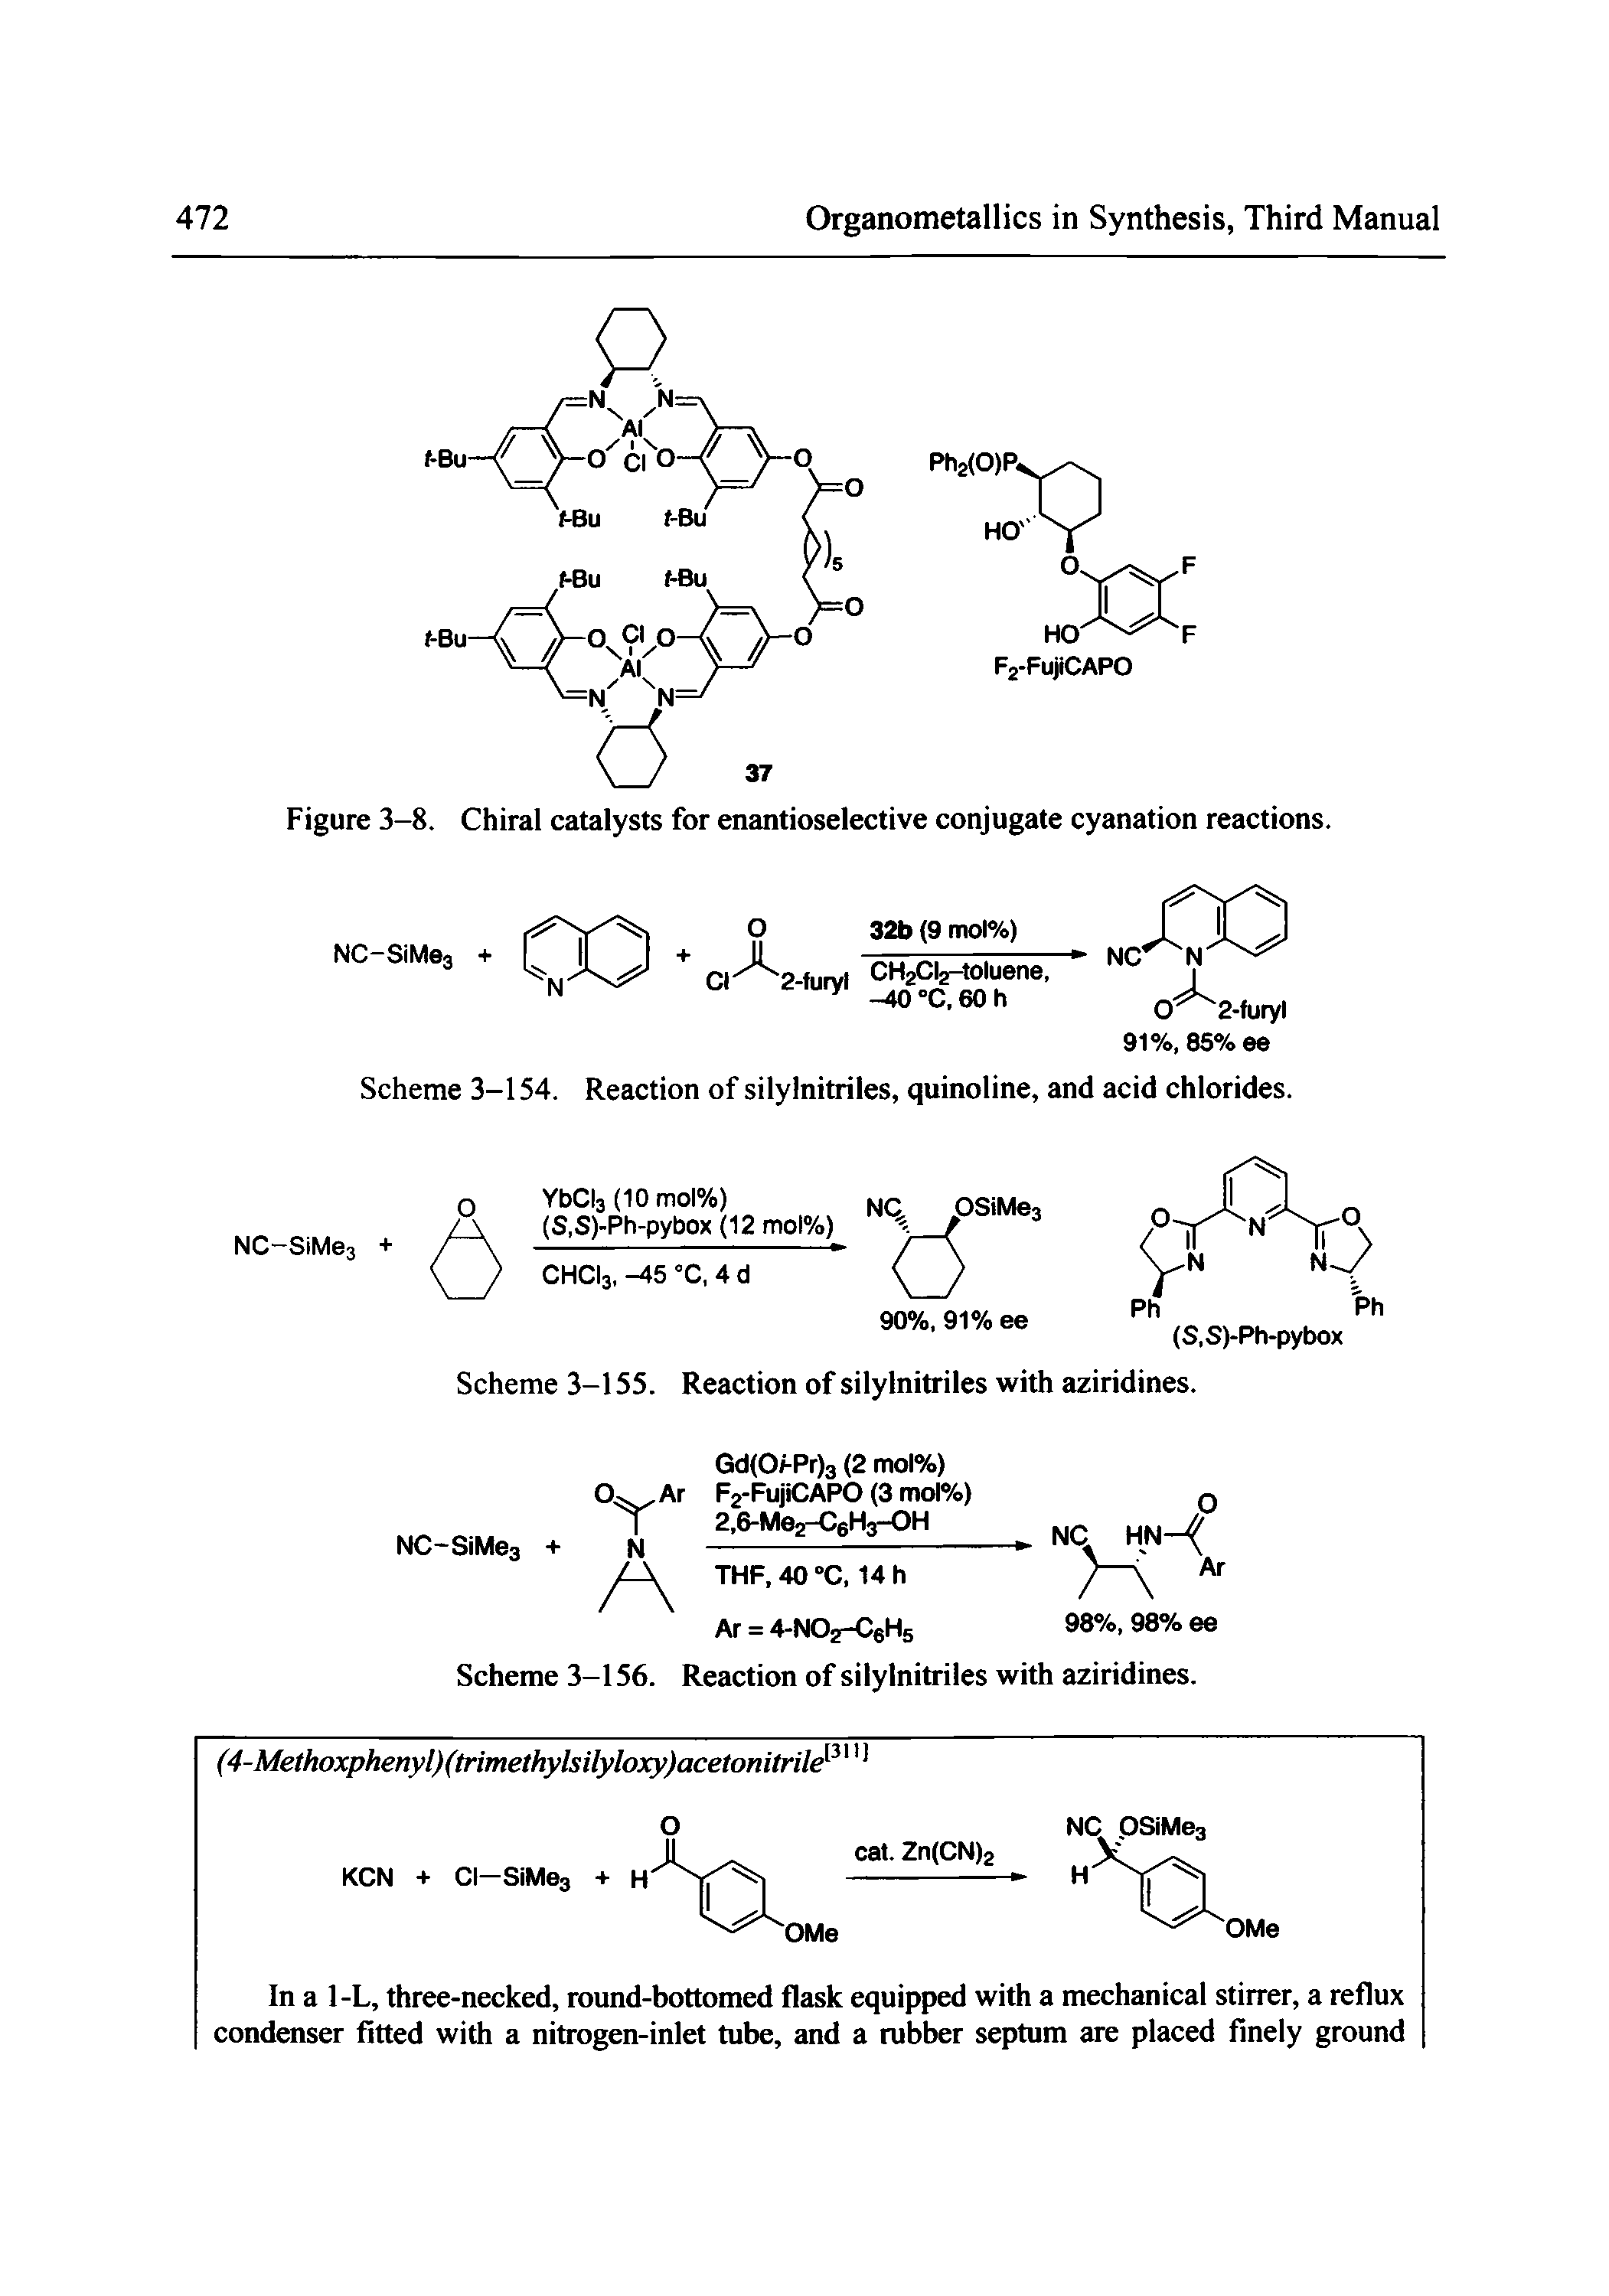 Figure 3-8. Chiral catalysts for enantioselective conjugate cyanation reactions.